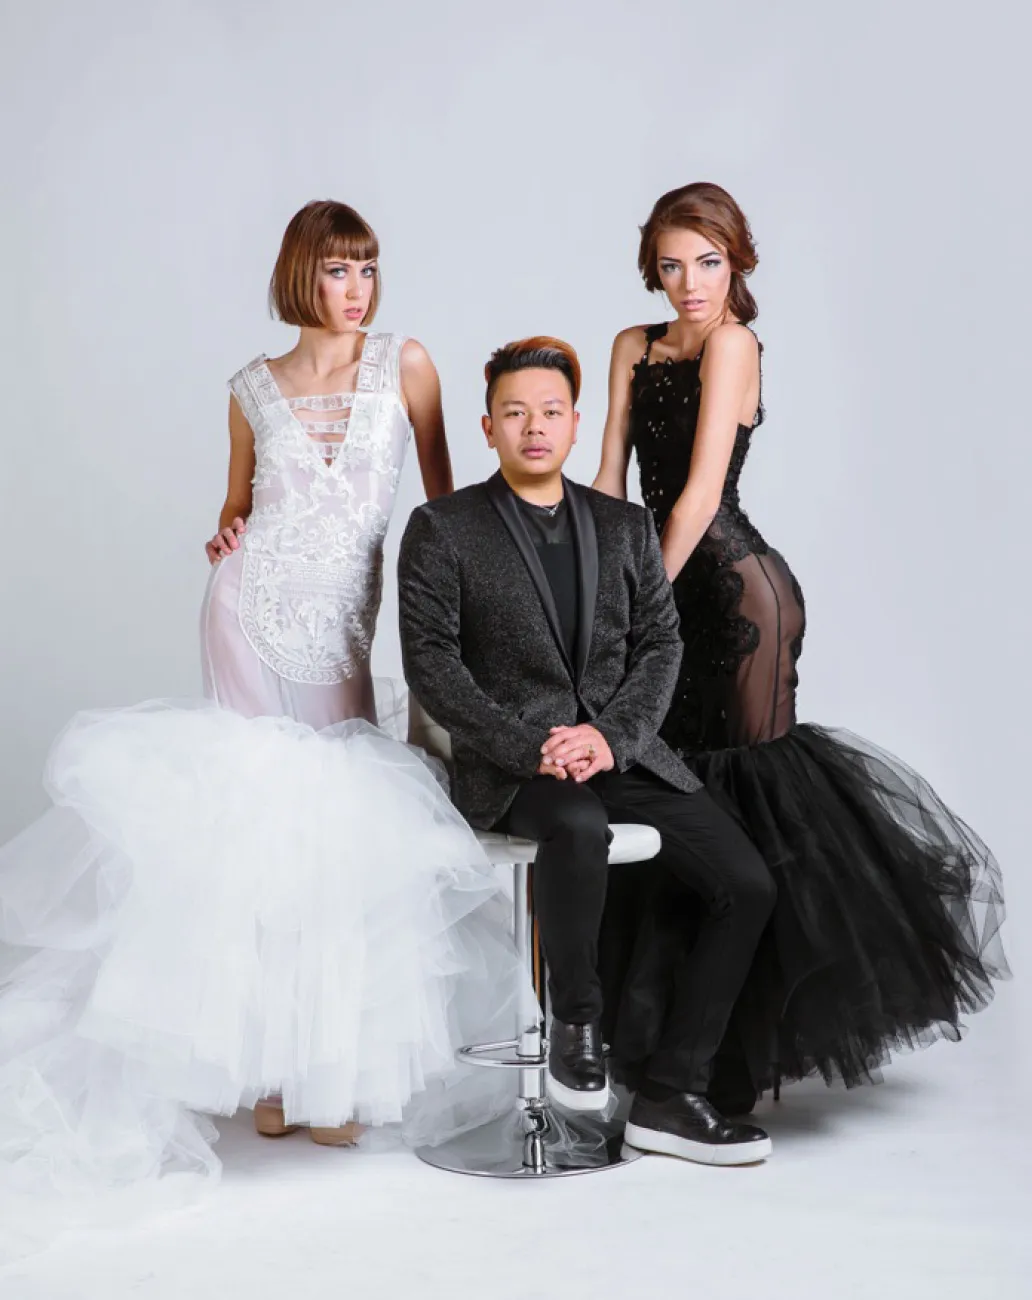 From left woman with lacey white dress, man sitting in black suit and woman in lace black dress